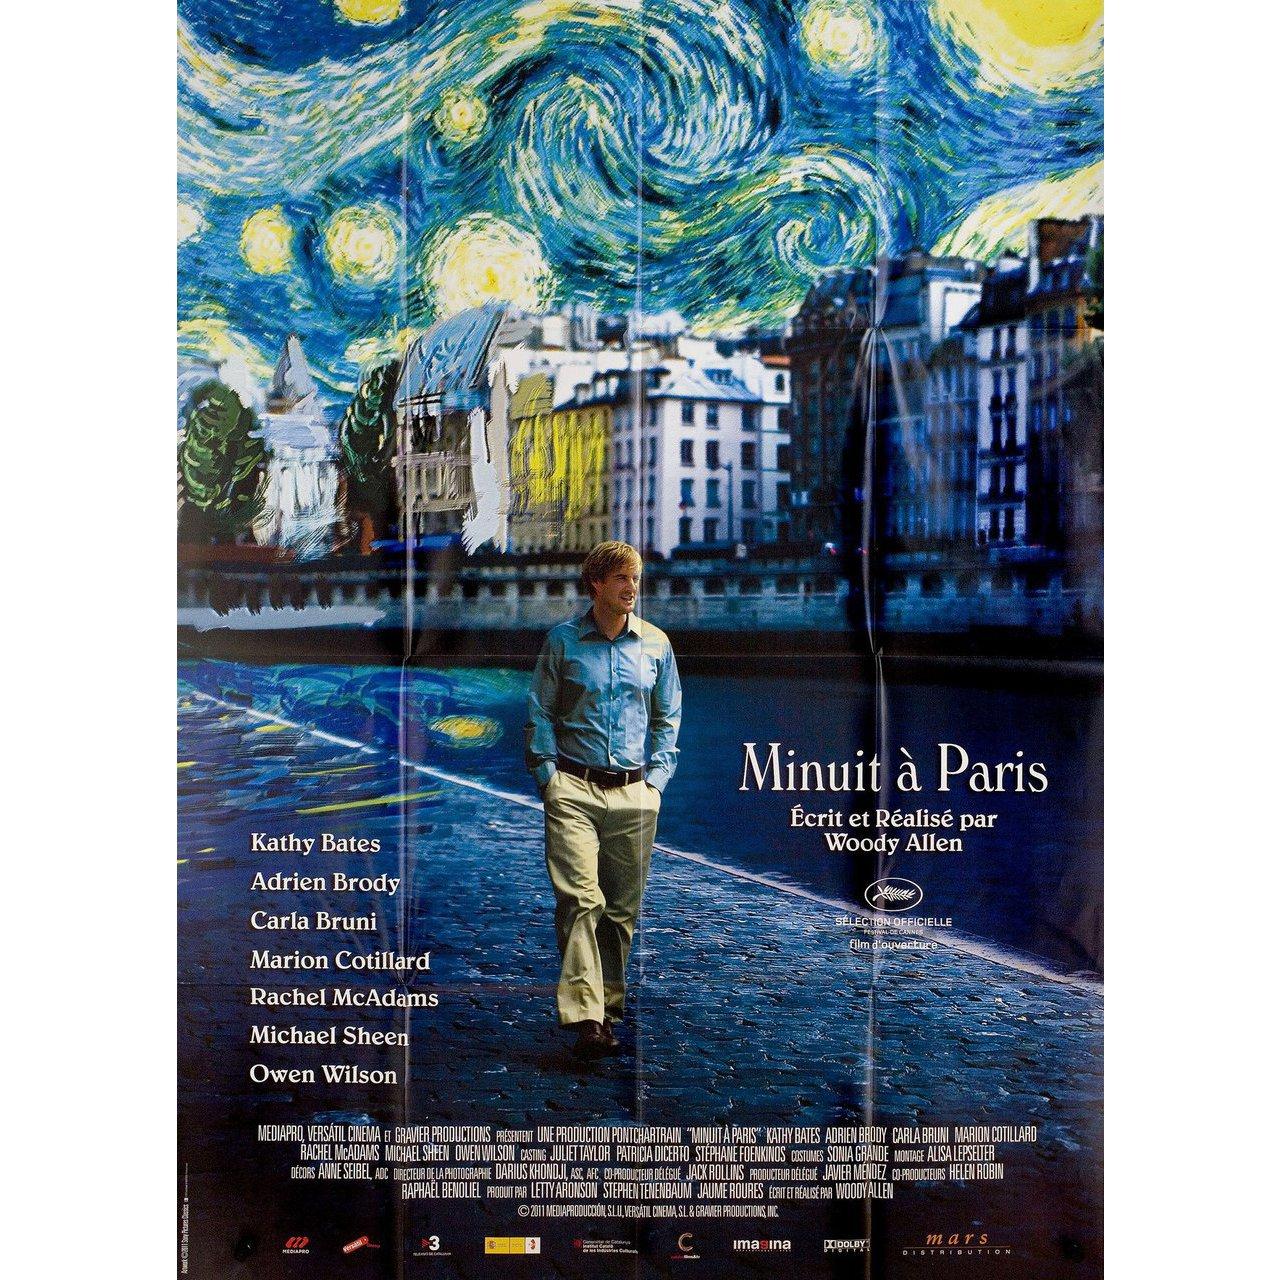 Original 2011 French grande poster for the film Midnight in Paris directed by Woody Allen with Owen Wilson / Rachel McAdams / Kurt Fuller / Mimi Kennedy. Fine condition, folded. Many original posters were issued folded or were subsequently folded.